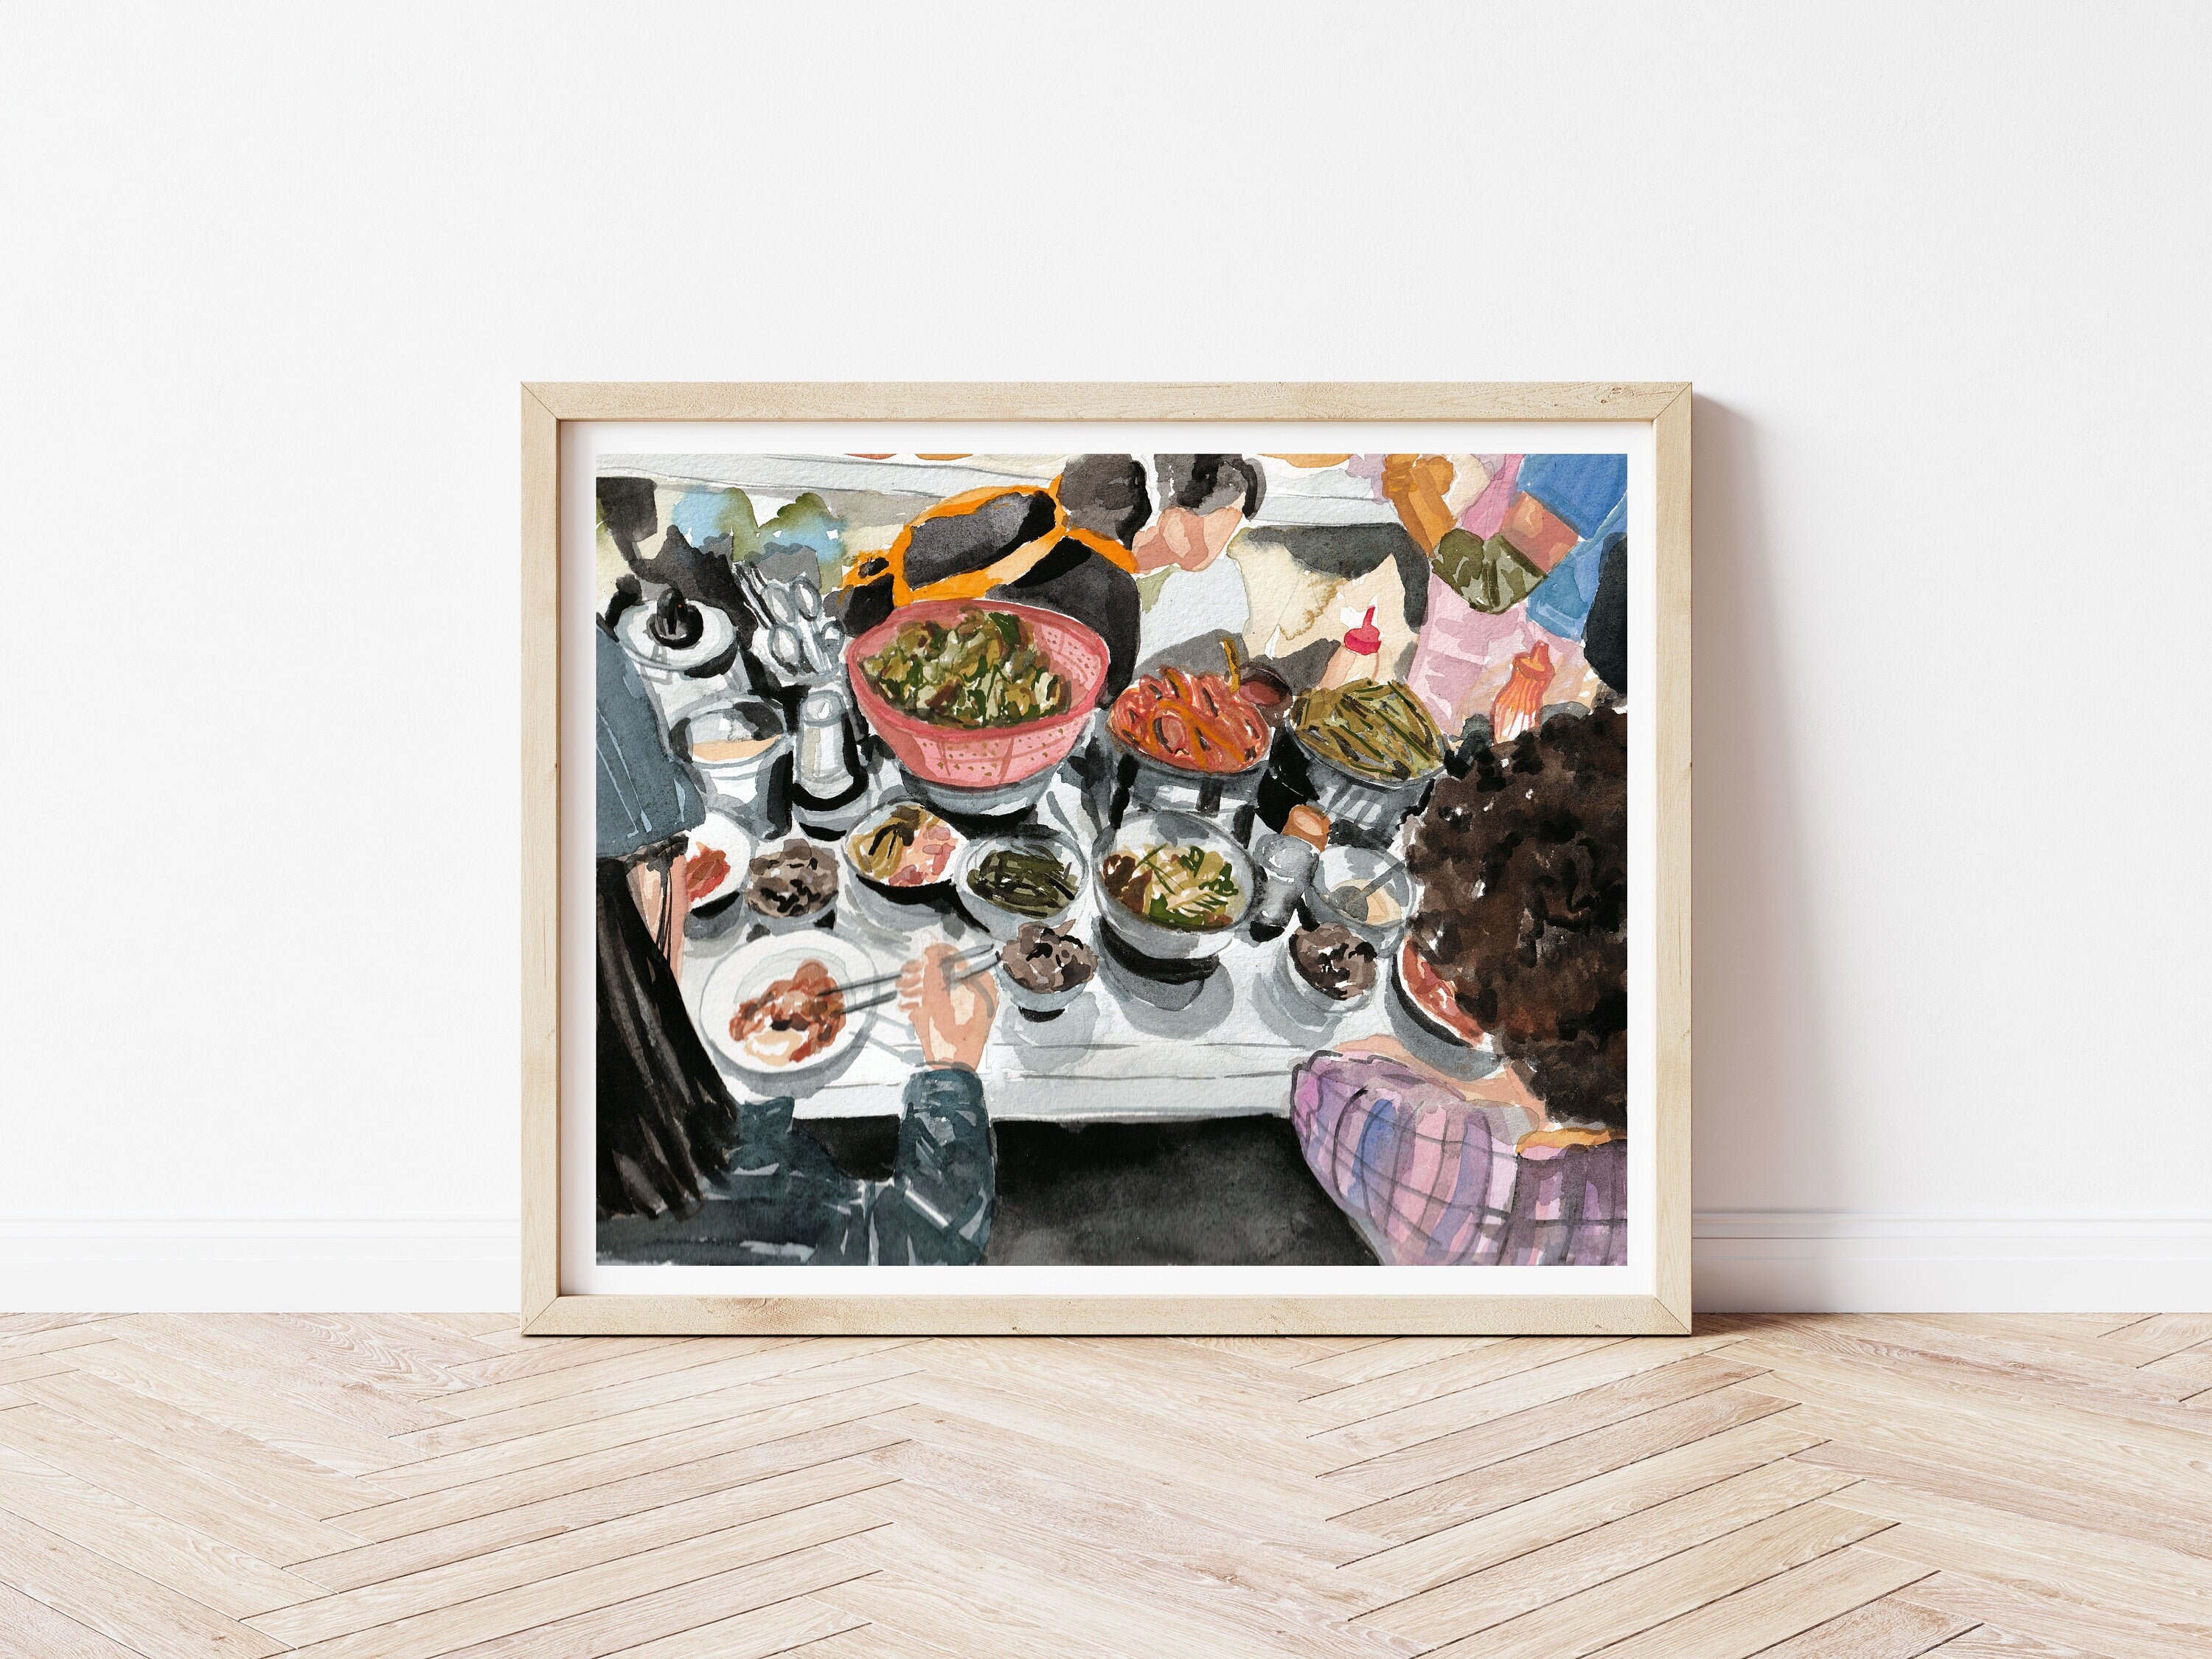 Korean street food - back of heads print of painting by Medjool Studio.  Print of original gouache painting featuring a scene from a food market in Korea. Shows the view from behind a couple overlooking a table full of different street foods.